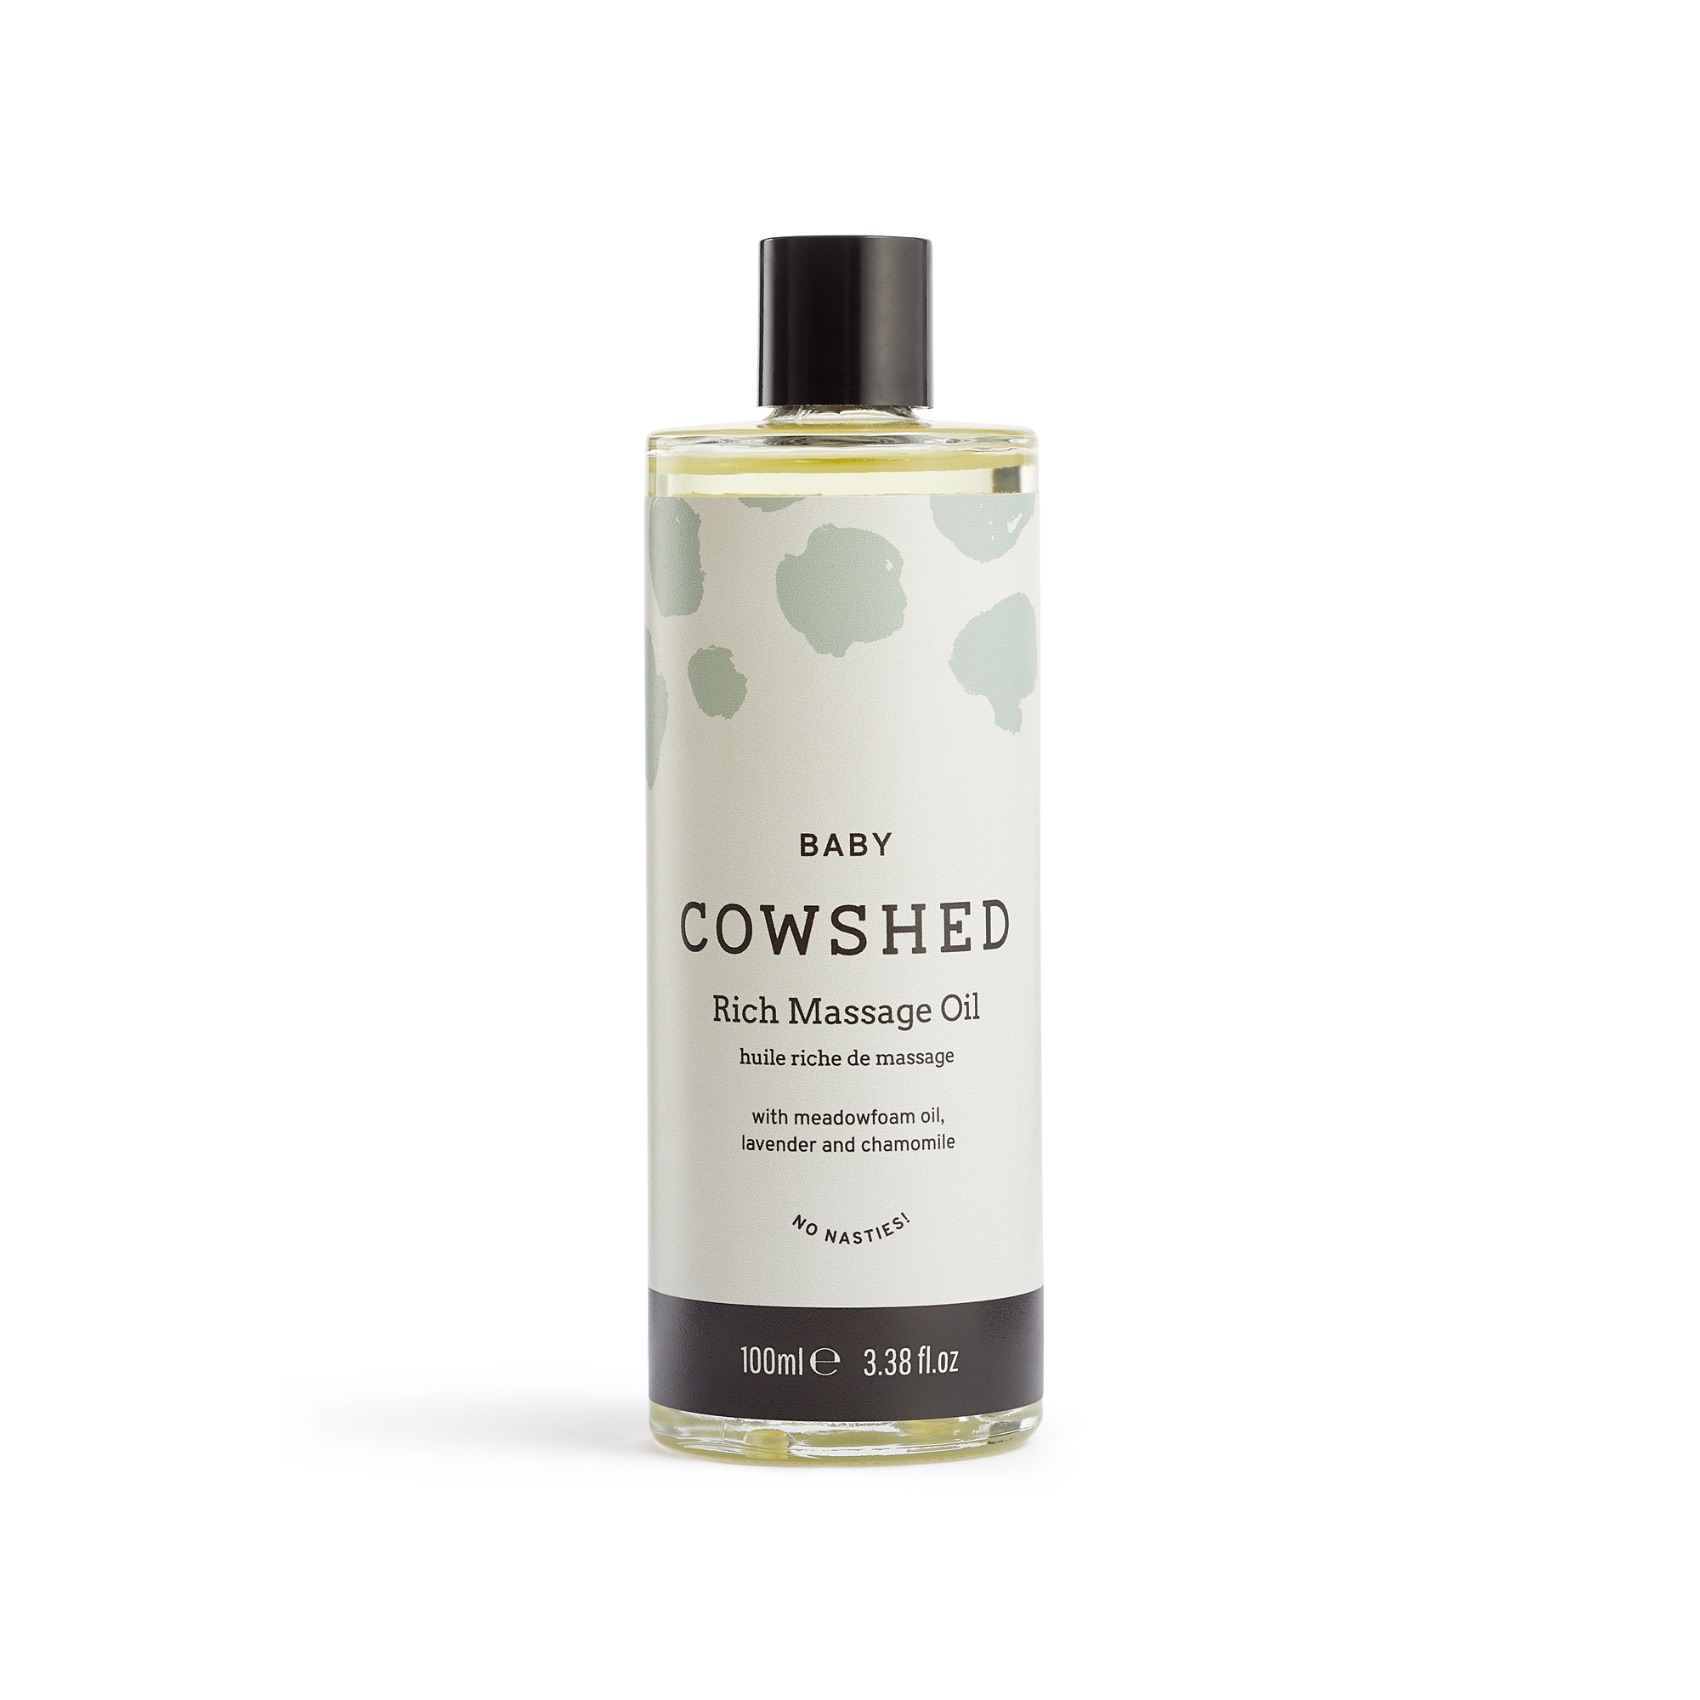 Cowshed BABY Rich Massage Oil 100ml